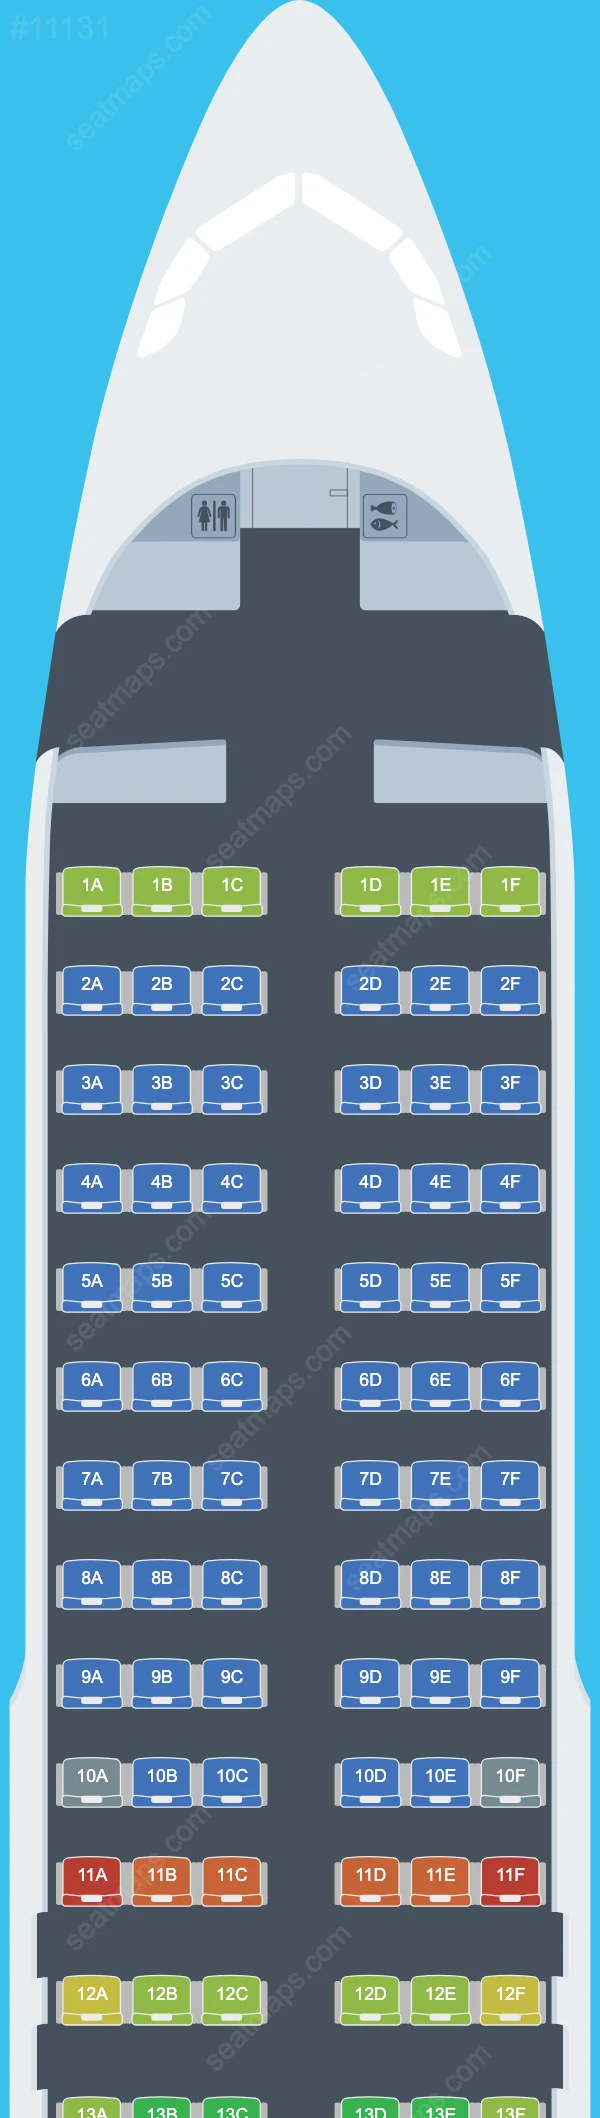 Network Aviation Airbus A320 Seat Maps A320-200 V.2